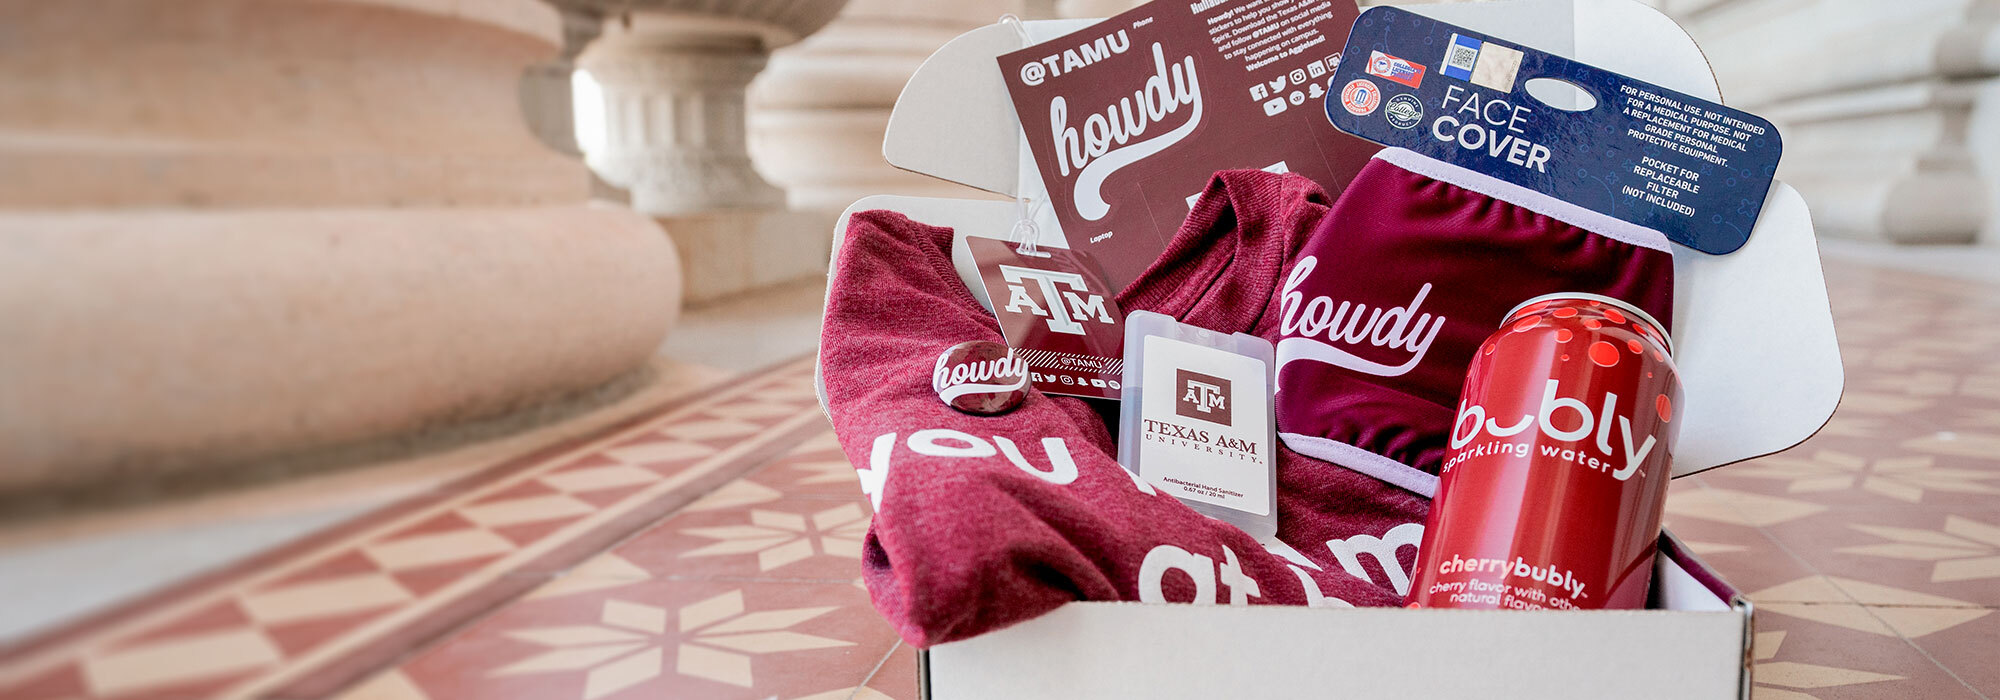 TAMU Howdy week prize box including a t-shirt, hand sanitizer, stickers, and co branded bubly